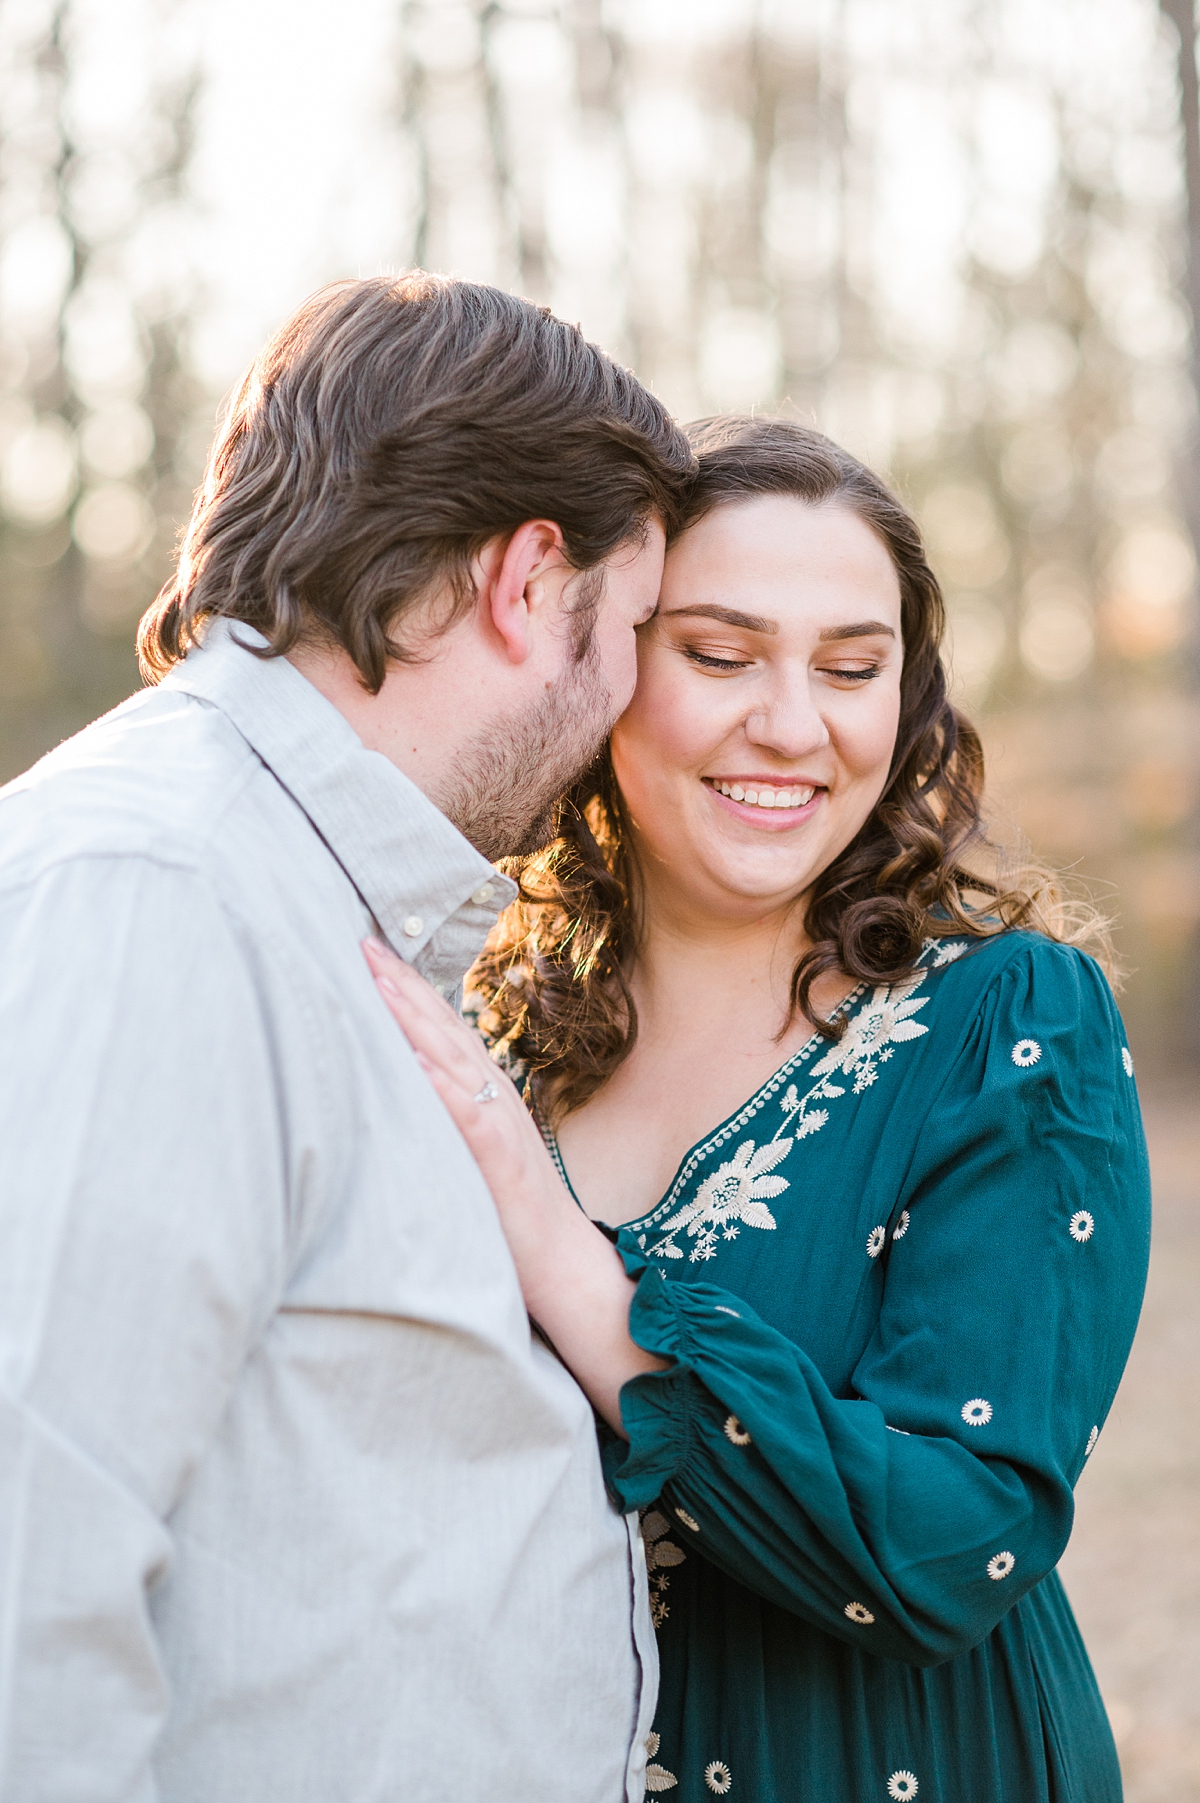 Celebrations at the Reservoir Engagement Session in the forest. Photography by Richmond Wedding Photographer Kailey Brianne Photography. 